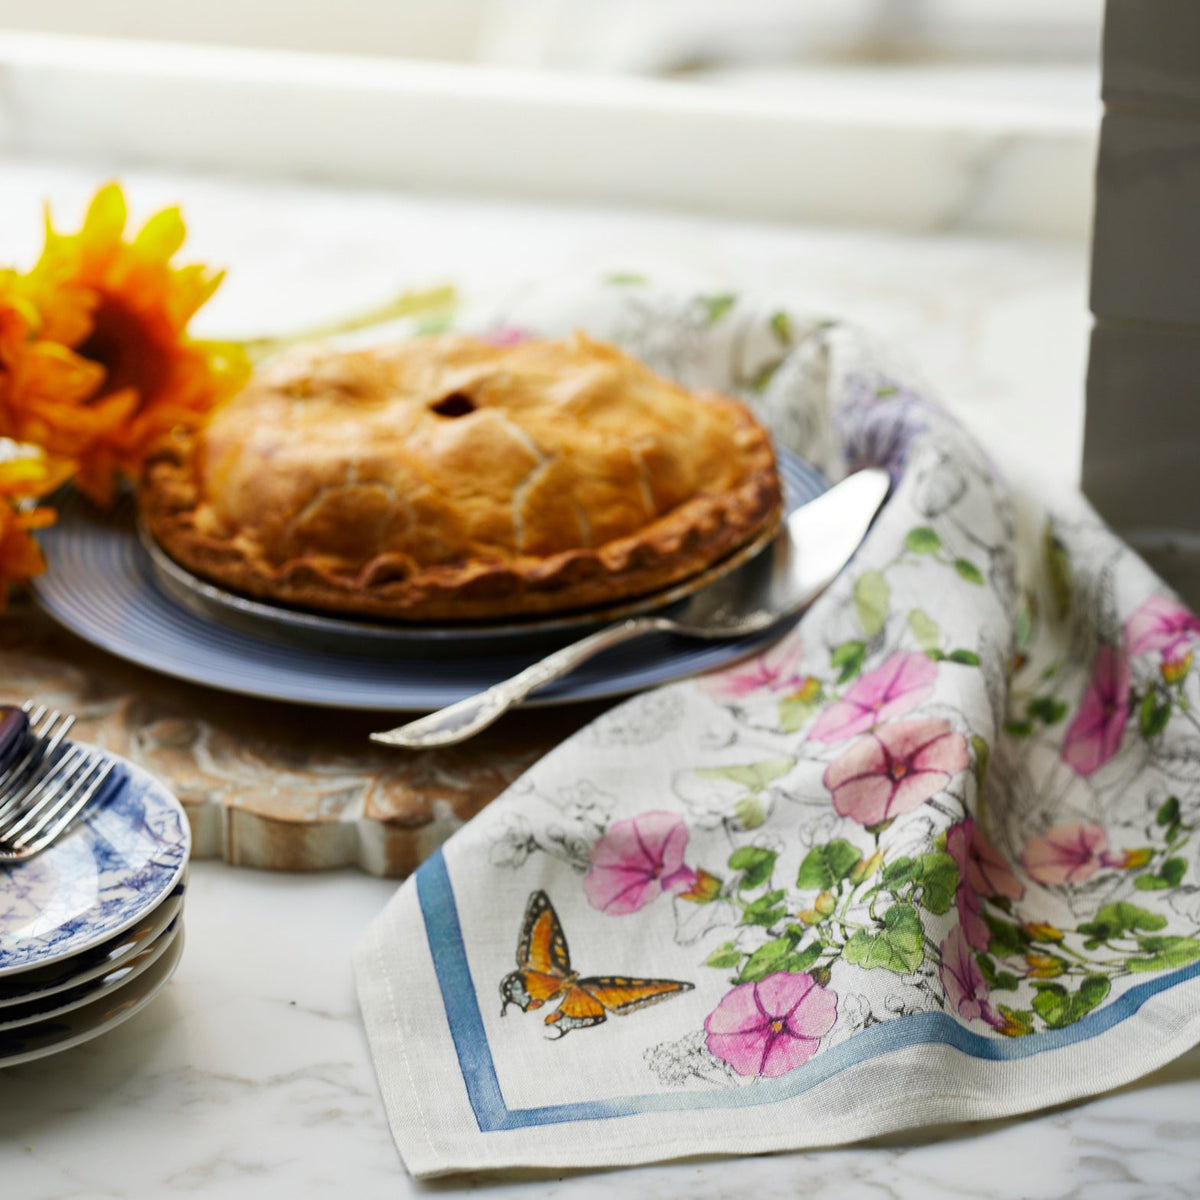 An exquisite pie is elegantly presented on a table adorned with beautiful flowers, surrounded by TTT Nasturtium Linen Kitchen Towels Set/2 for added charm.